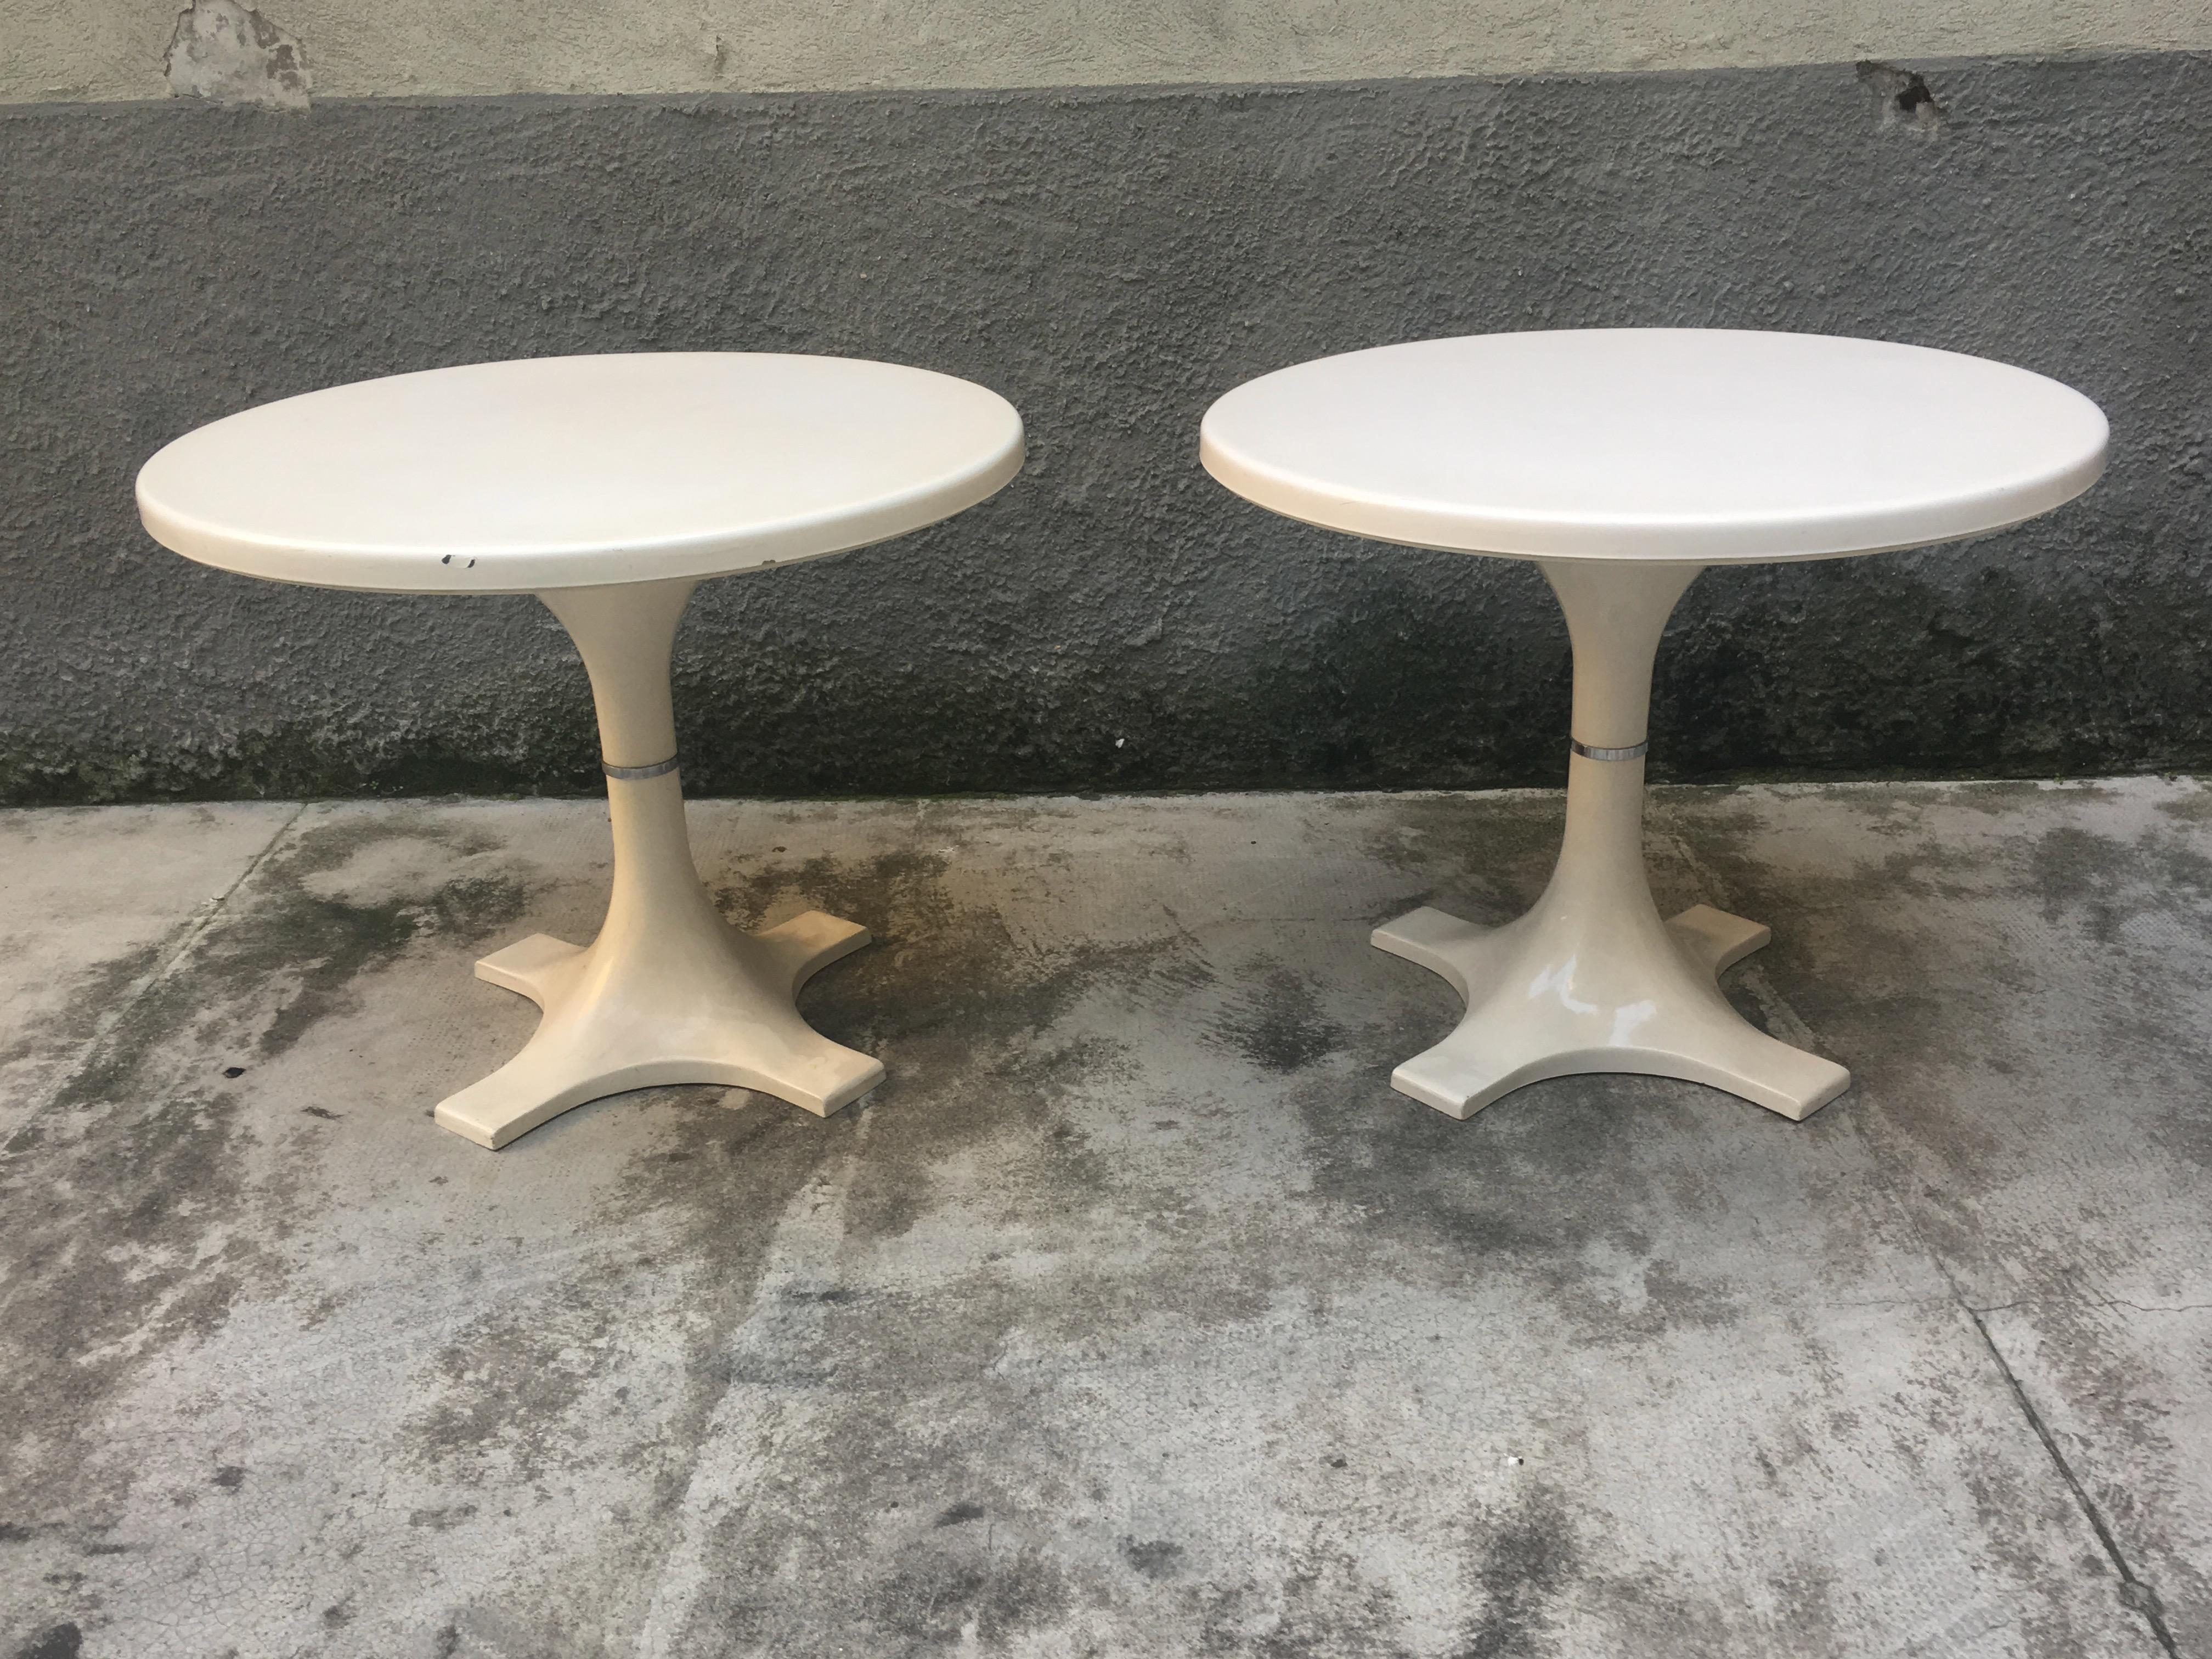 Good vintage condition with normal trace of age and use for this round dining table designed by Ignazio Gardella and Anna Castelli. Produced by Kartell during the 60s.
Two identical pieces available.
